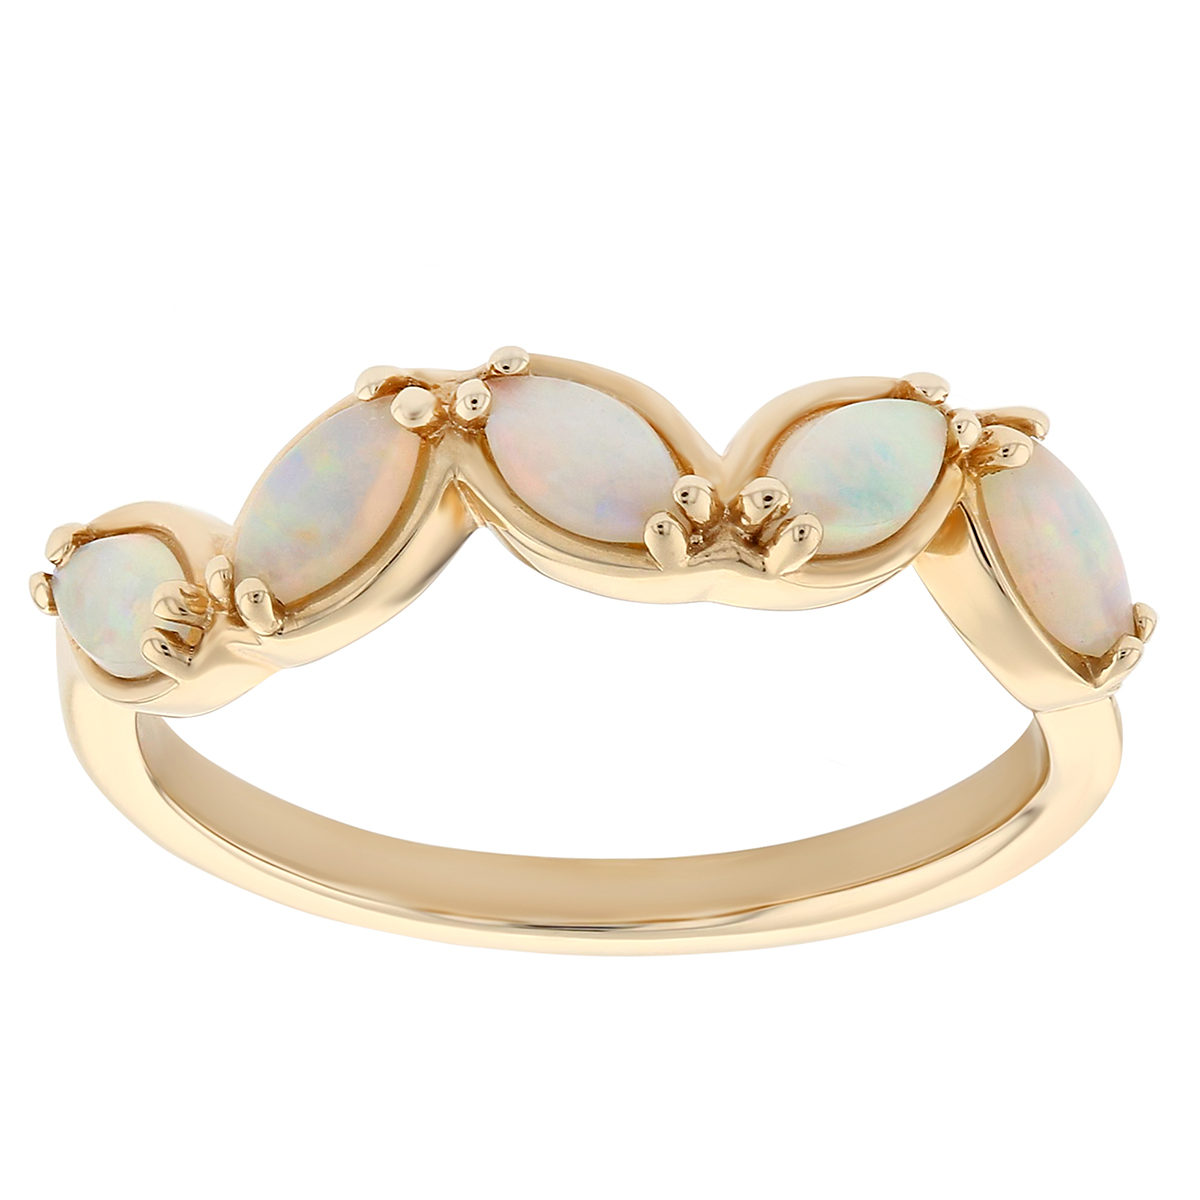 14K Yellow Gold Marquise Cabochon White Opal Ring | Borsheims